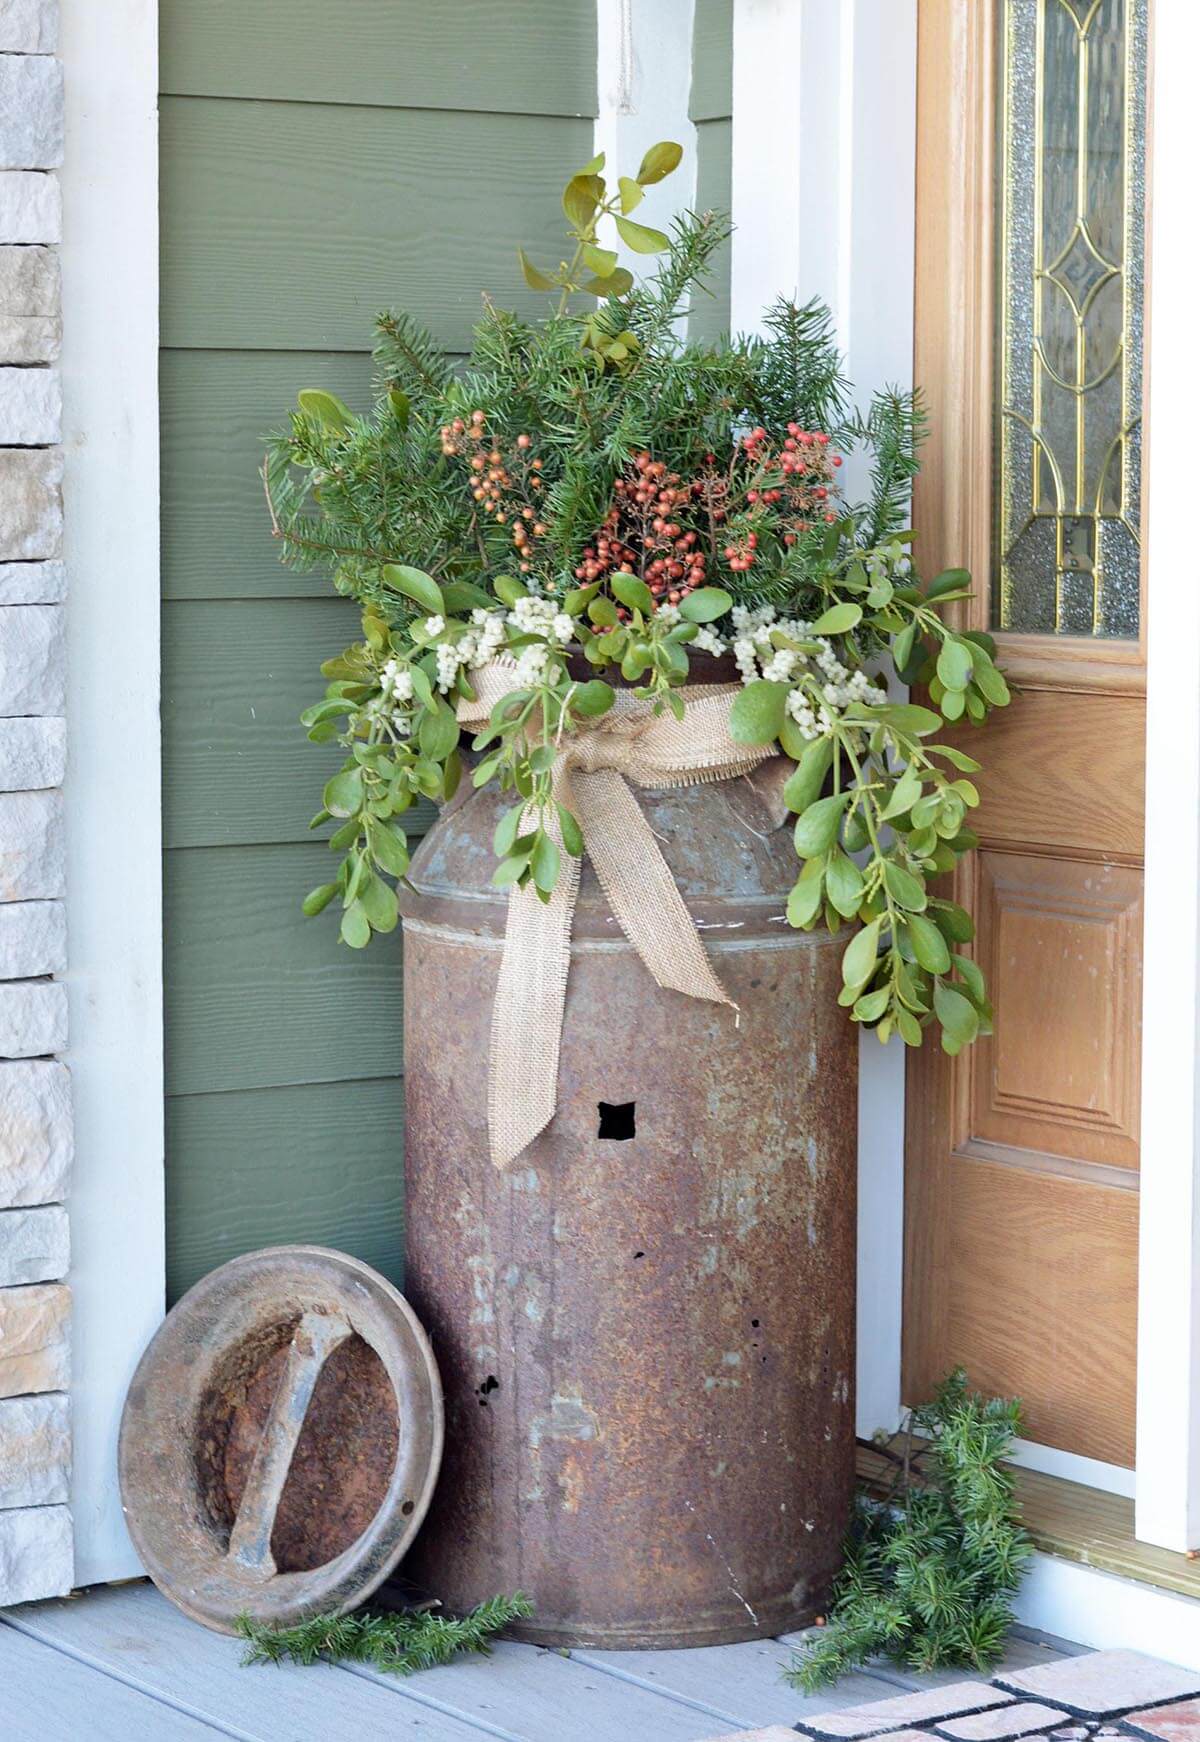 Welcome Spring: 17 Great DIY Flower Pot Ideas for Front Doors - Style